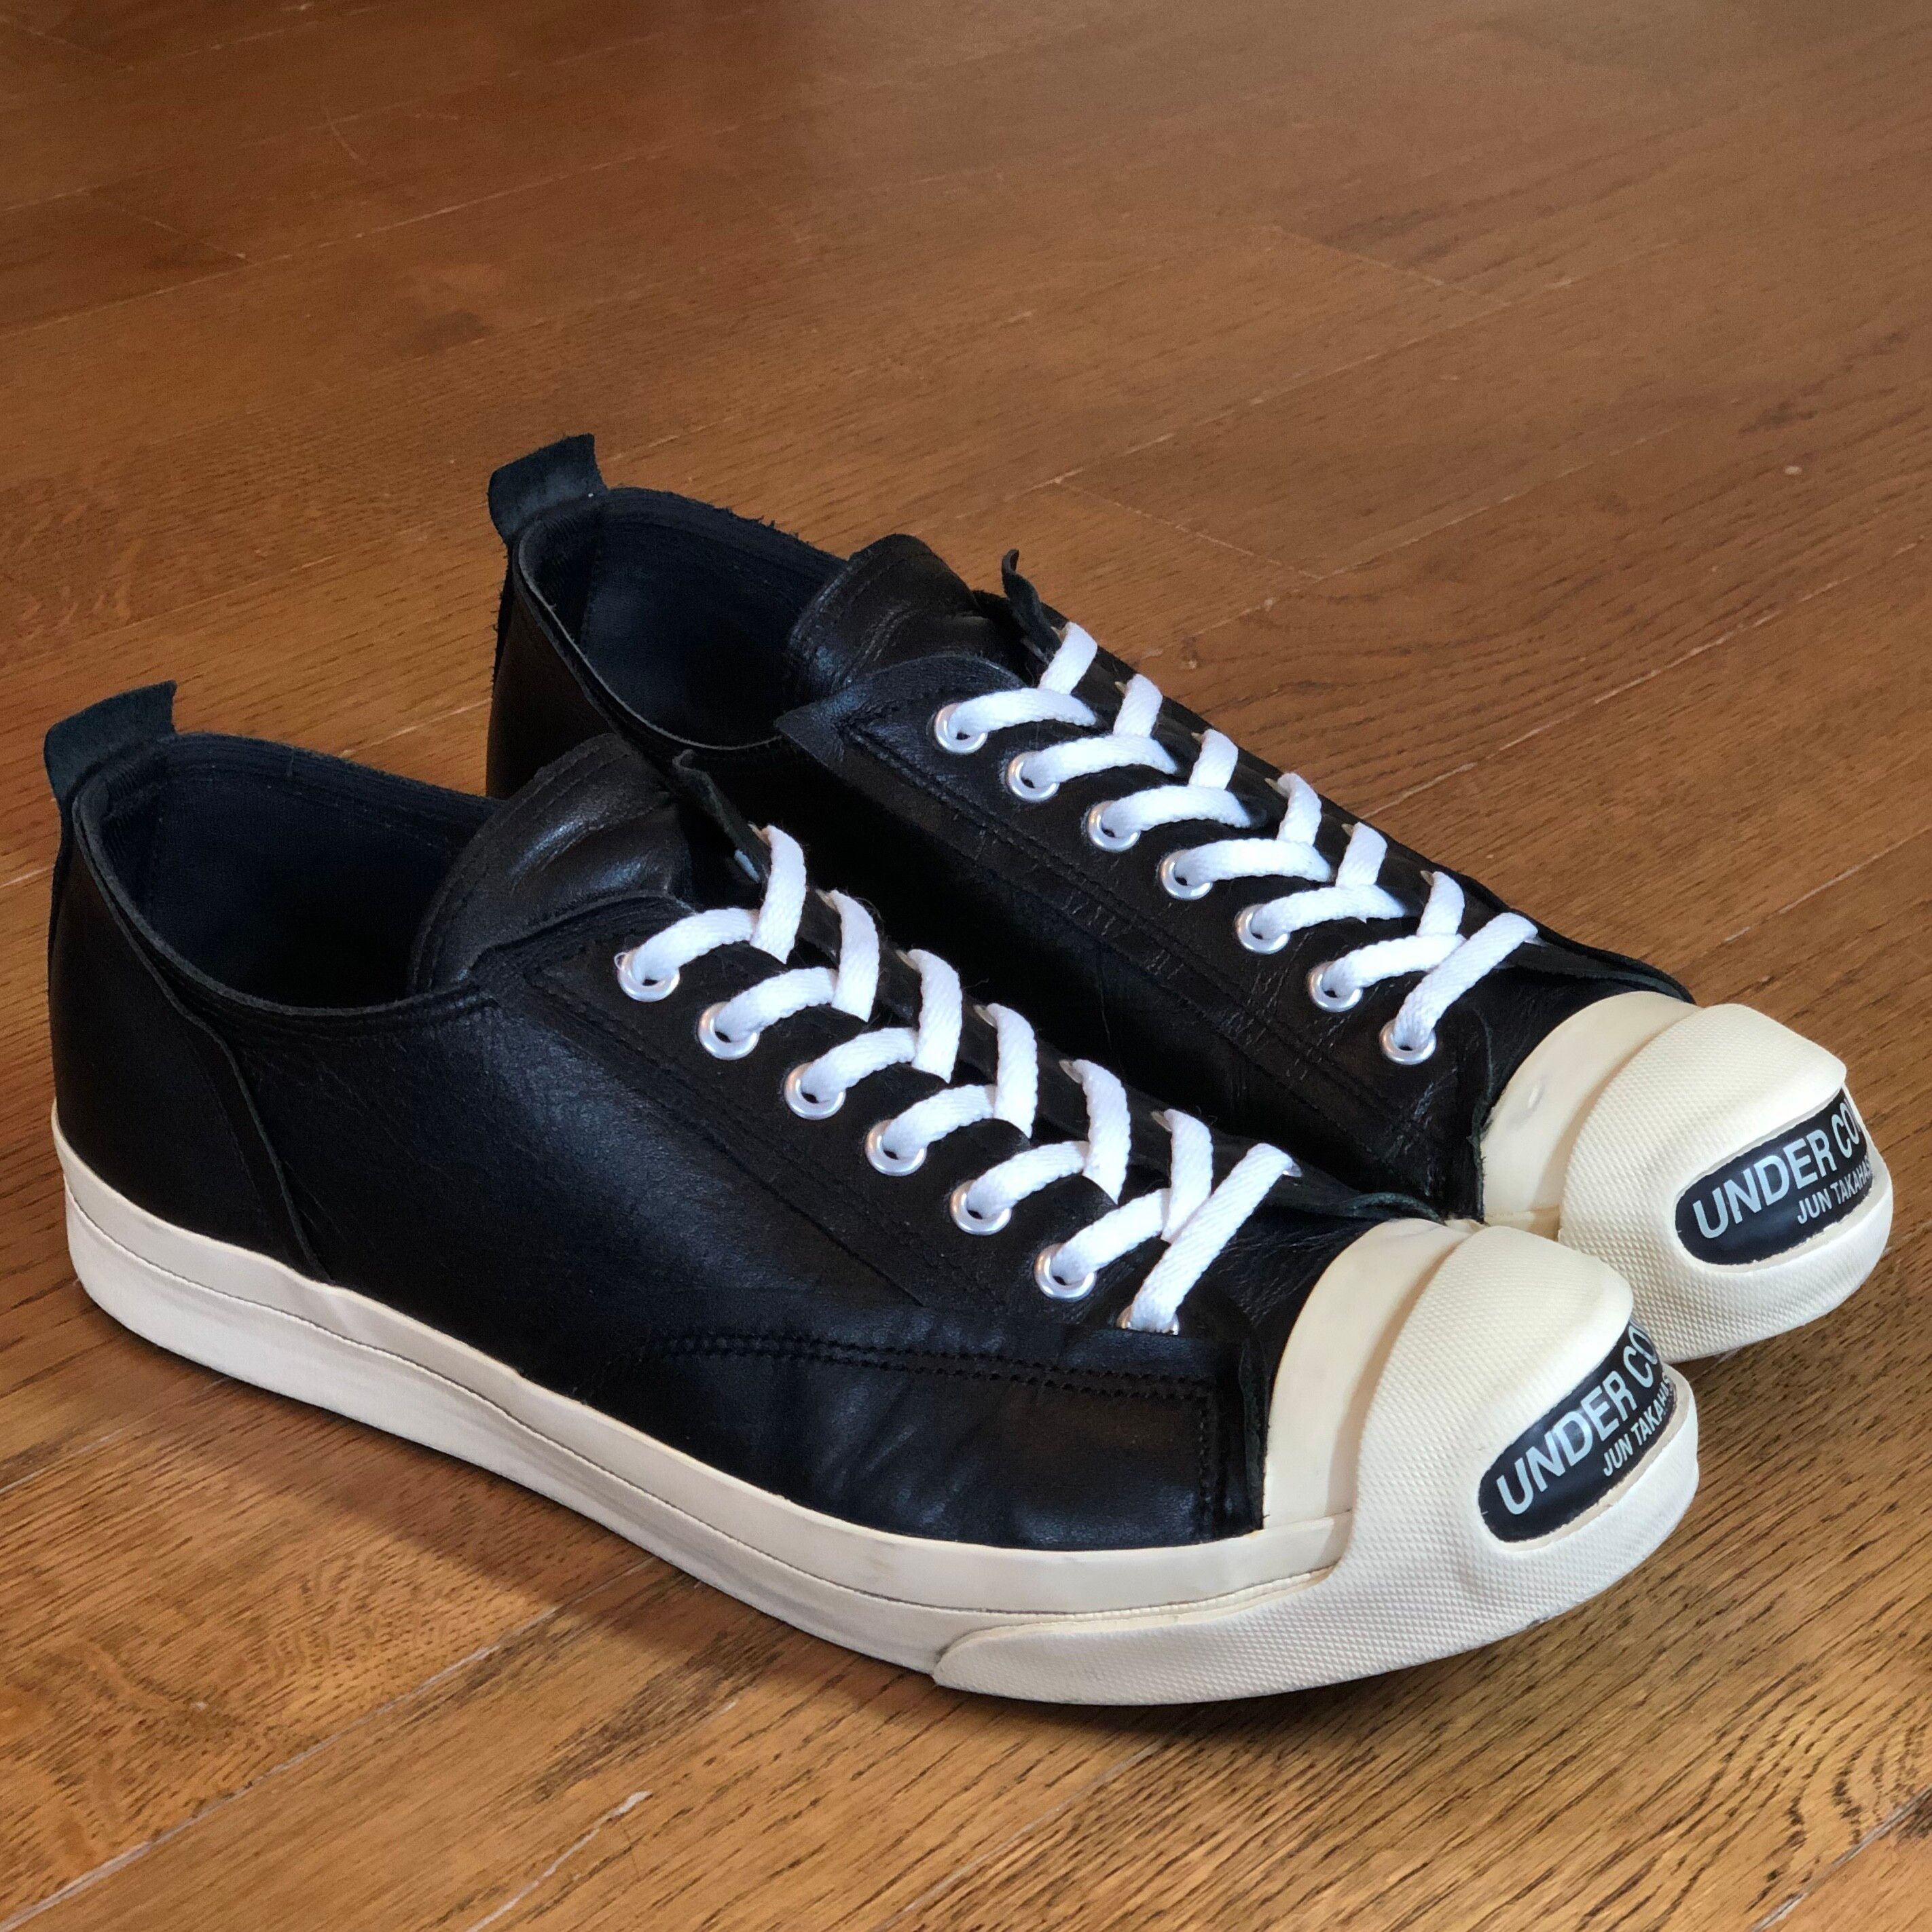 Undercover Undercover by Jun Takahashi Leather Jack Purcell Sneaker Size US 11 / EU 44 - 1 Preview